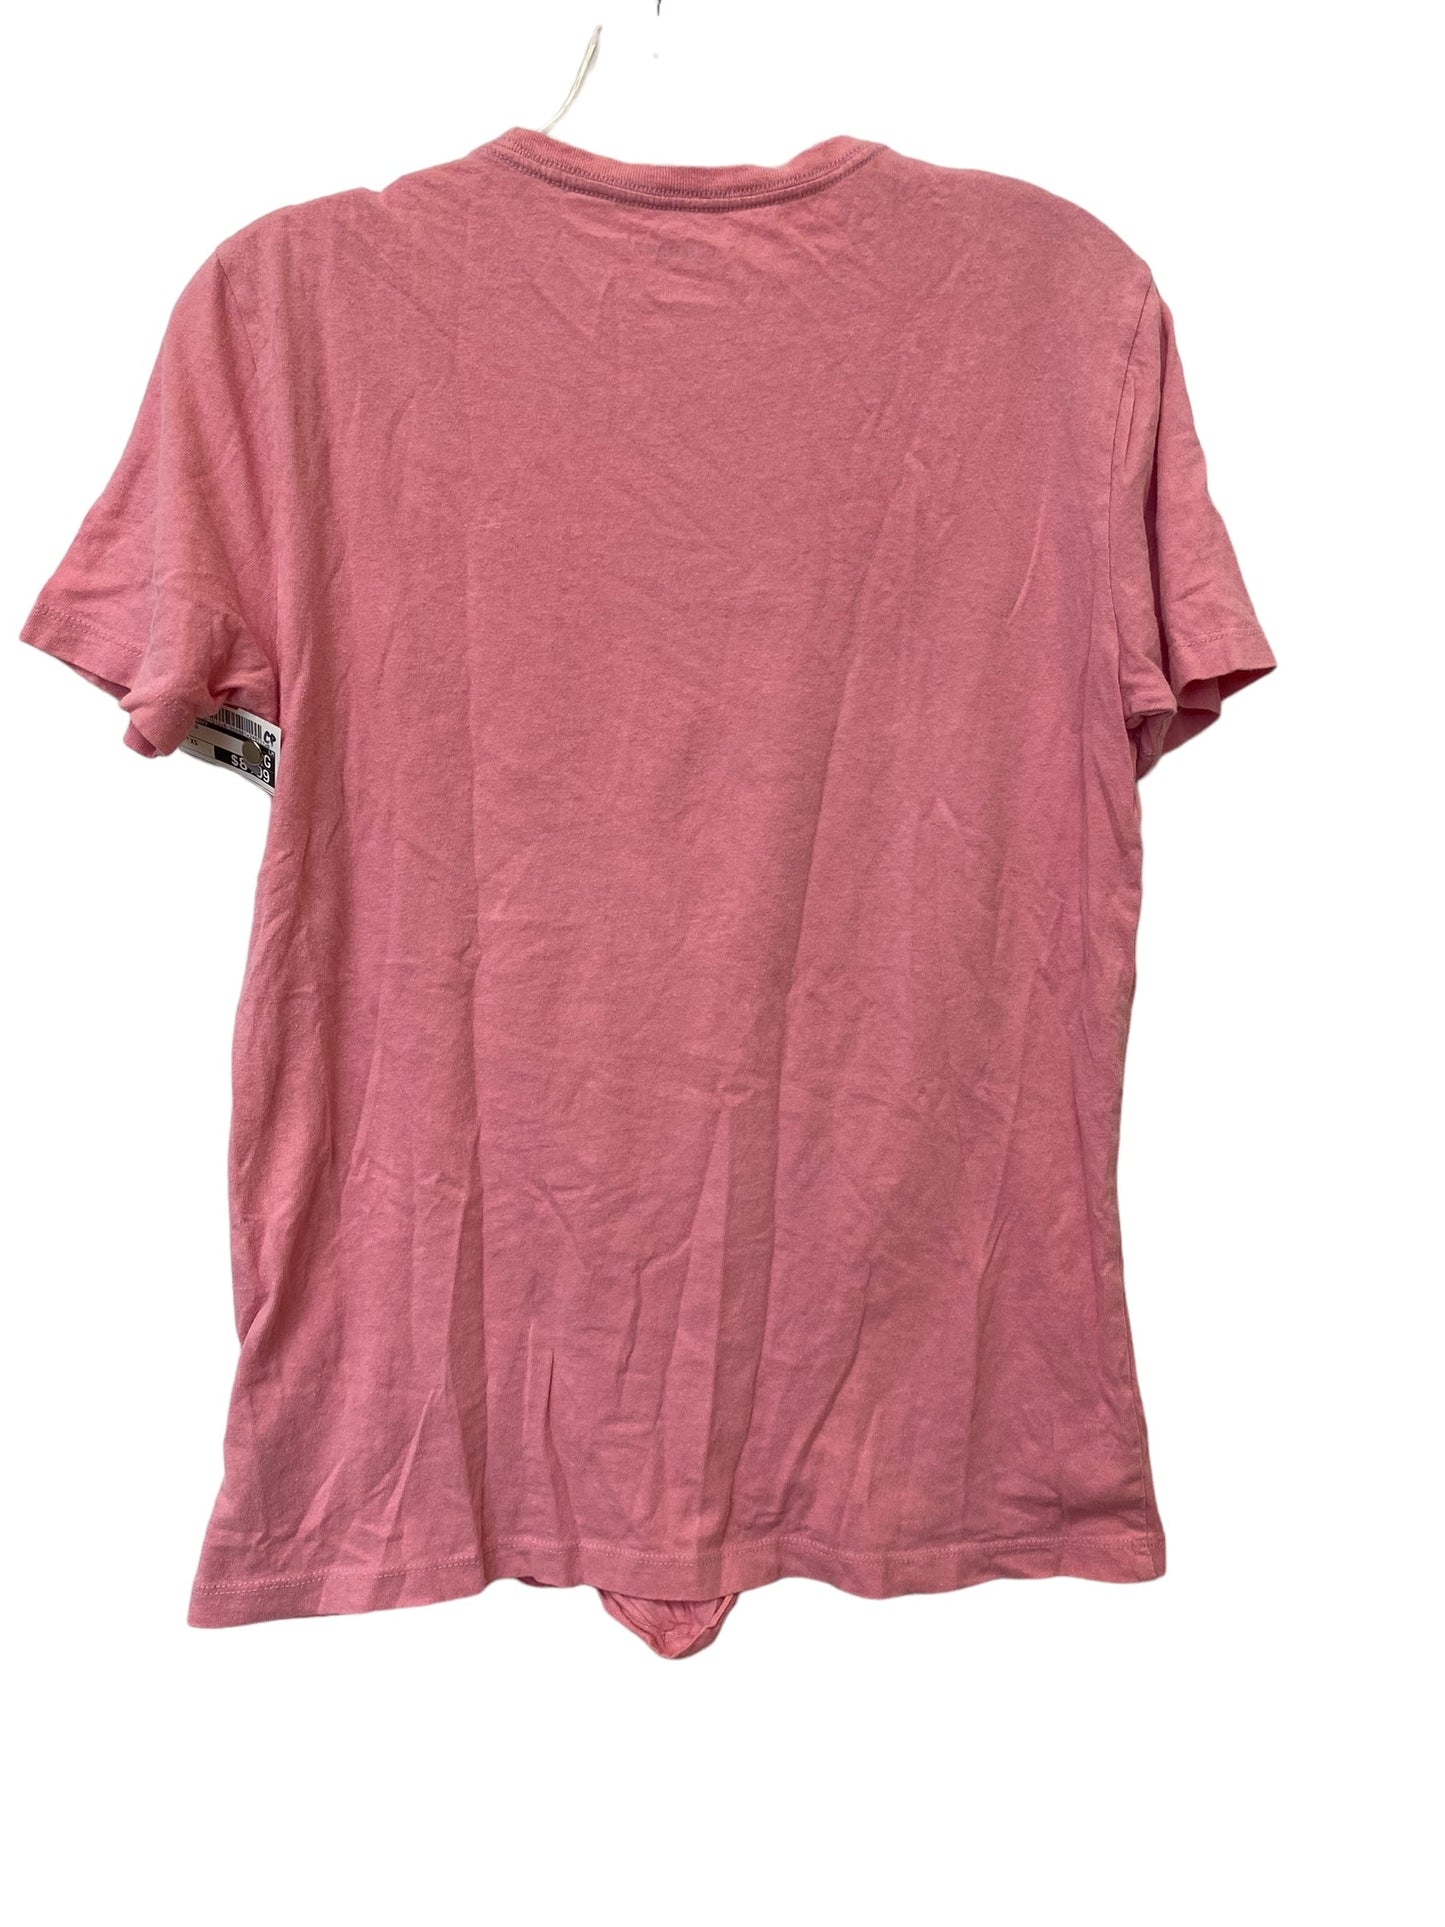 Pink Top Short Sleeve Old Navy, Size Xs